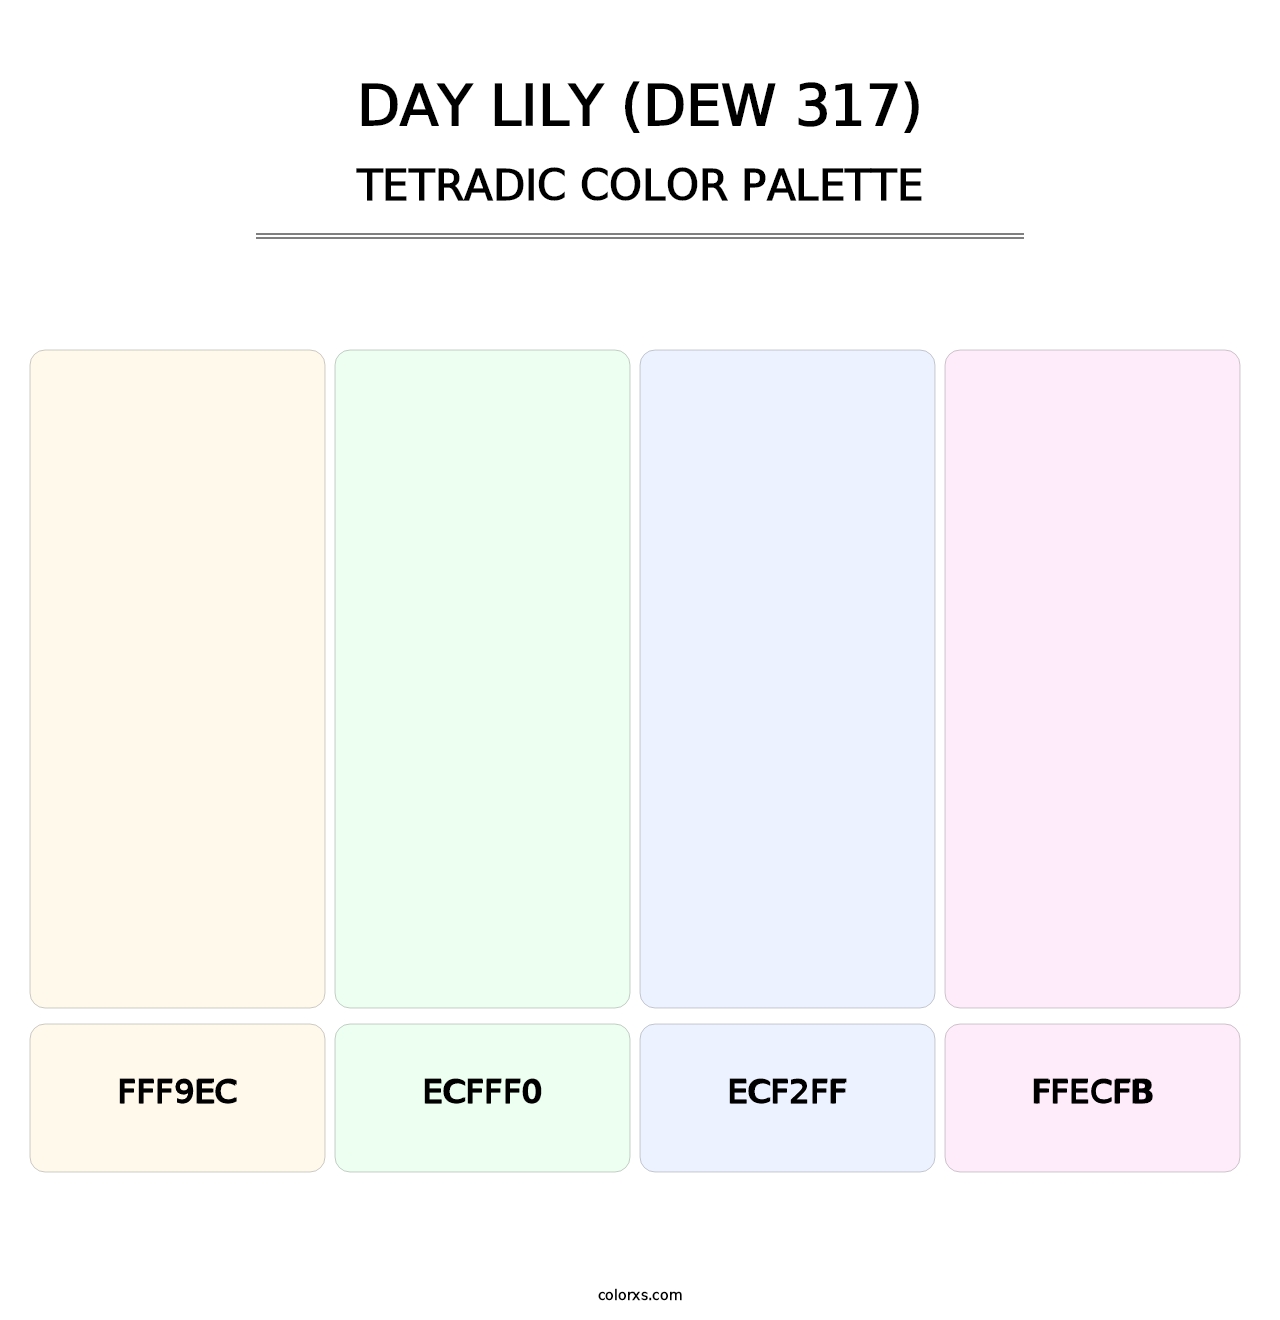 Day Lily (DEW 317) - Tetradic Color Palette